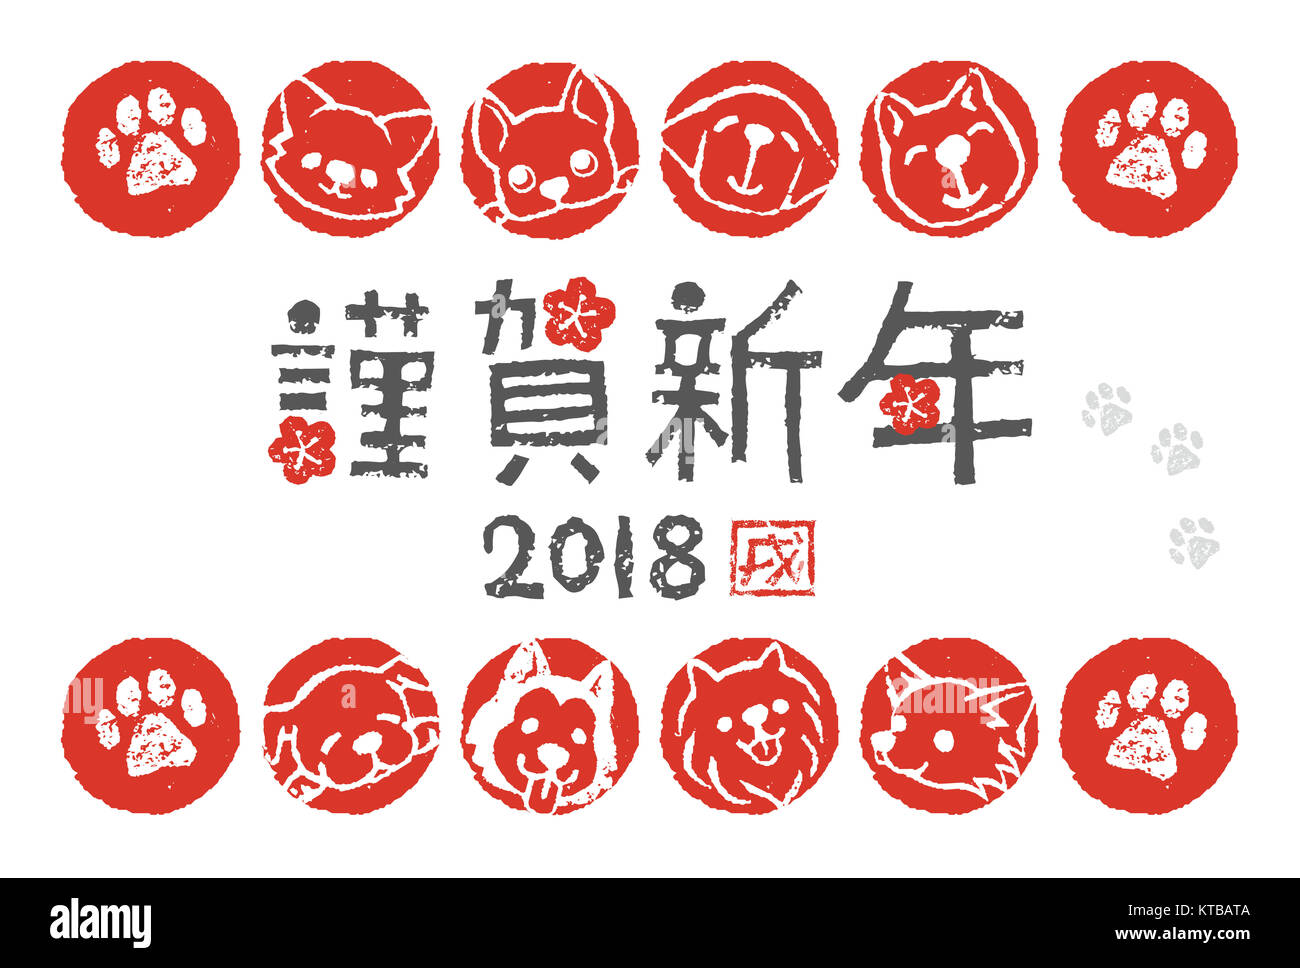 New Year card with dog illustrations, translation of Japanese Happy New Year Stock Photo